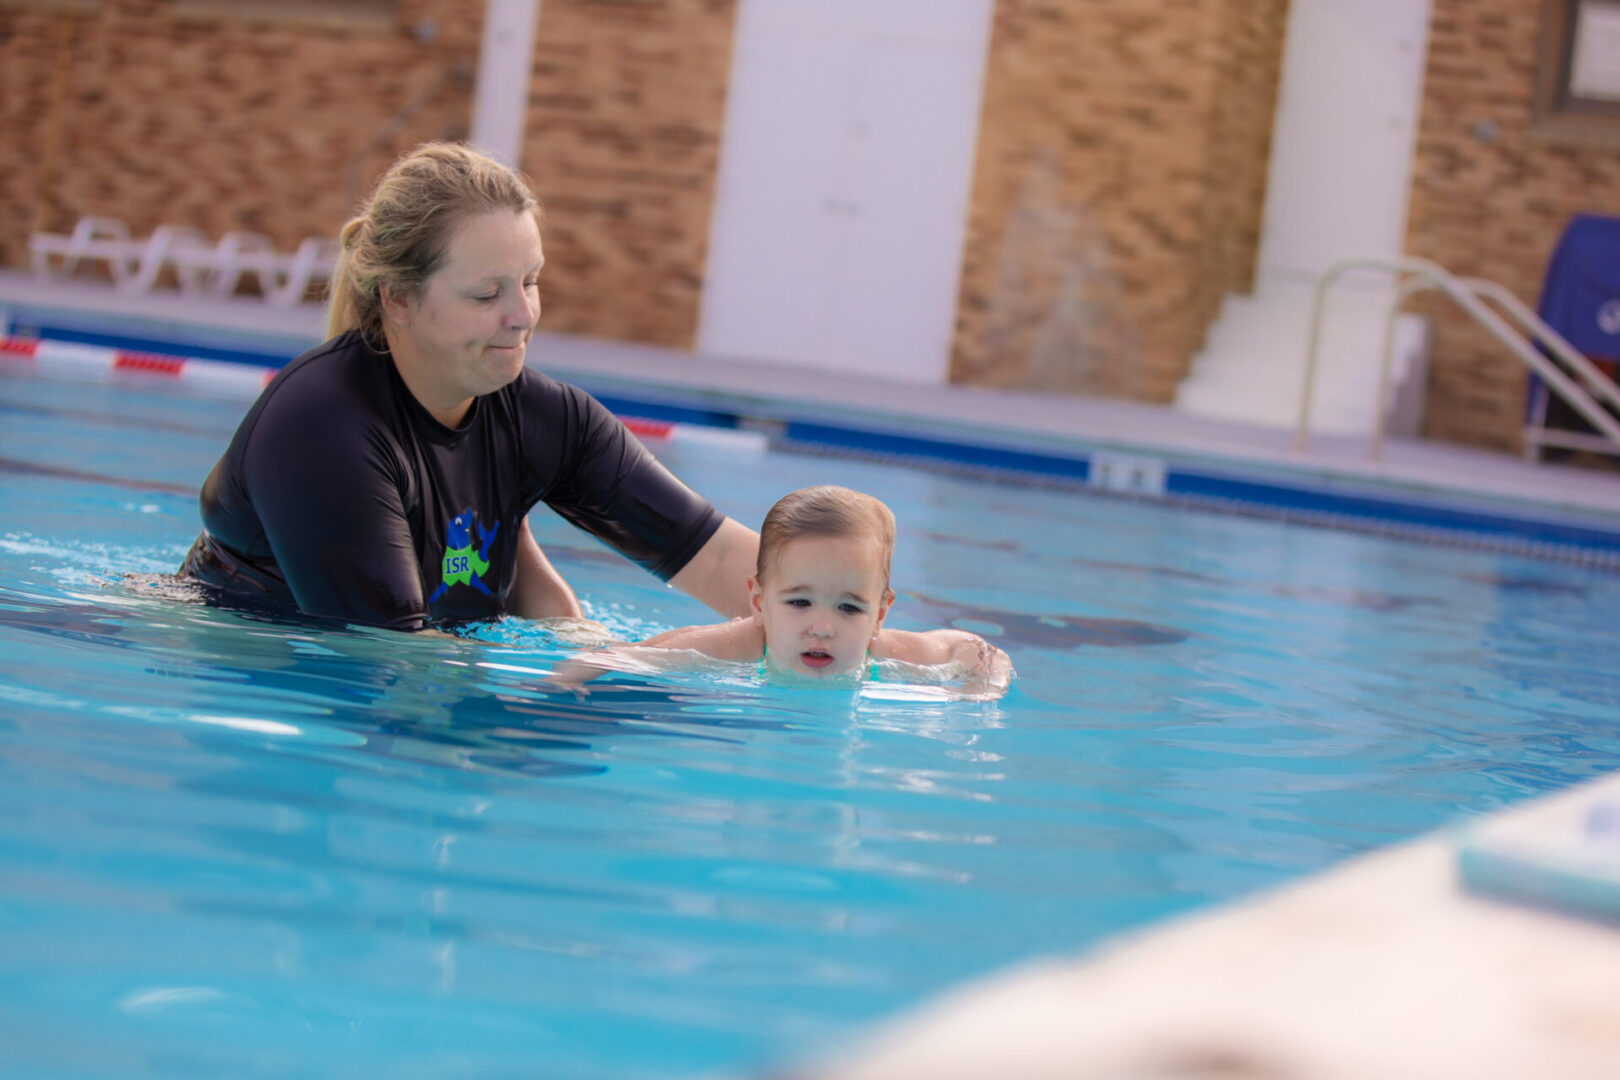 A woman and child in the water at an indoor pool.